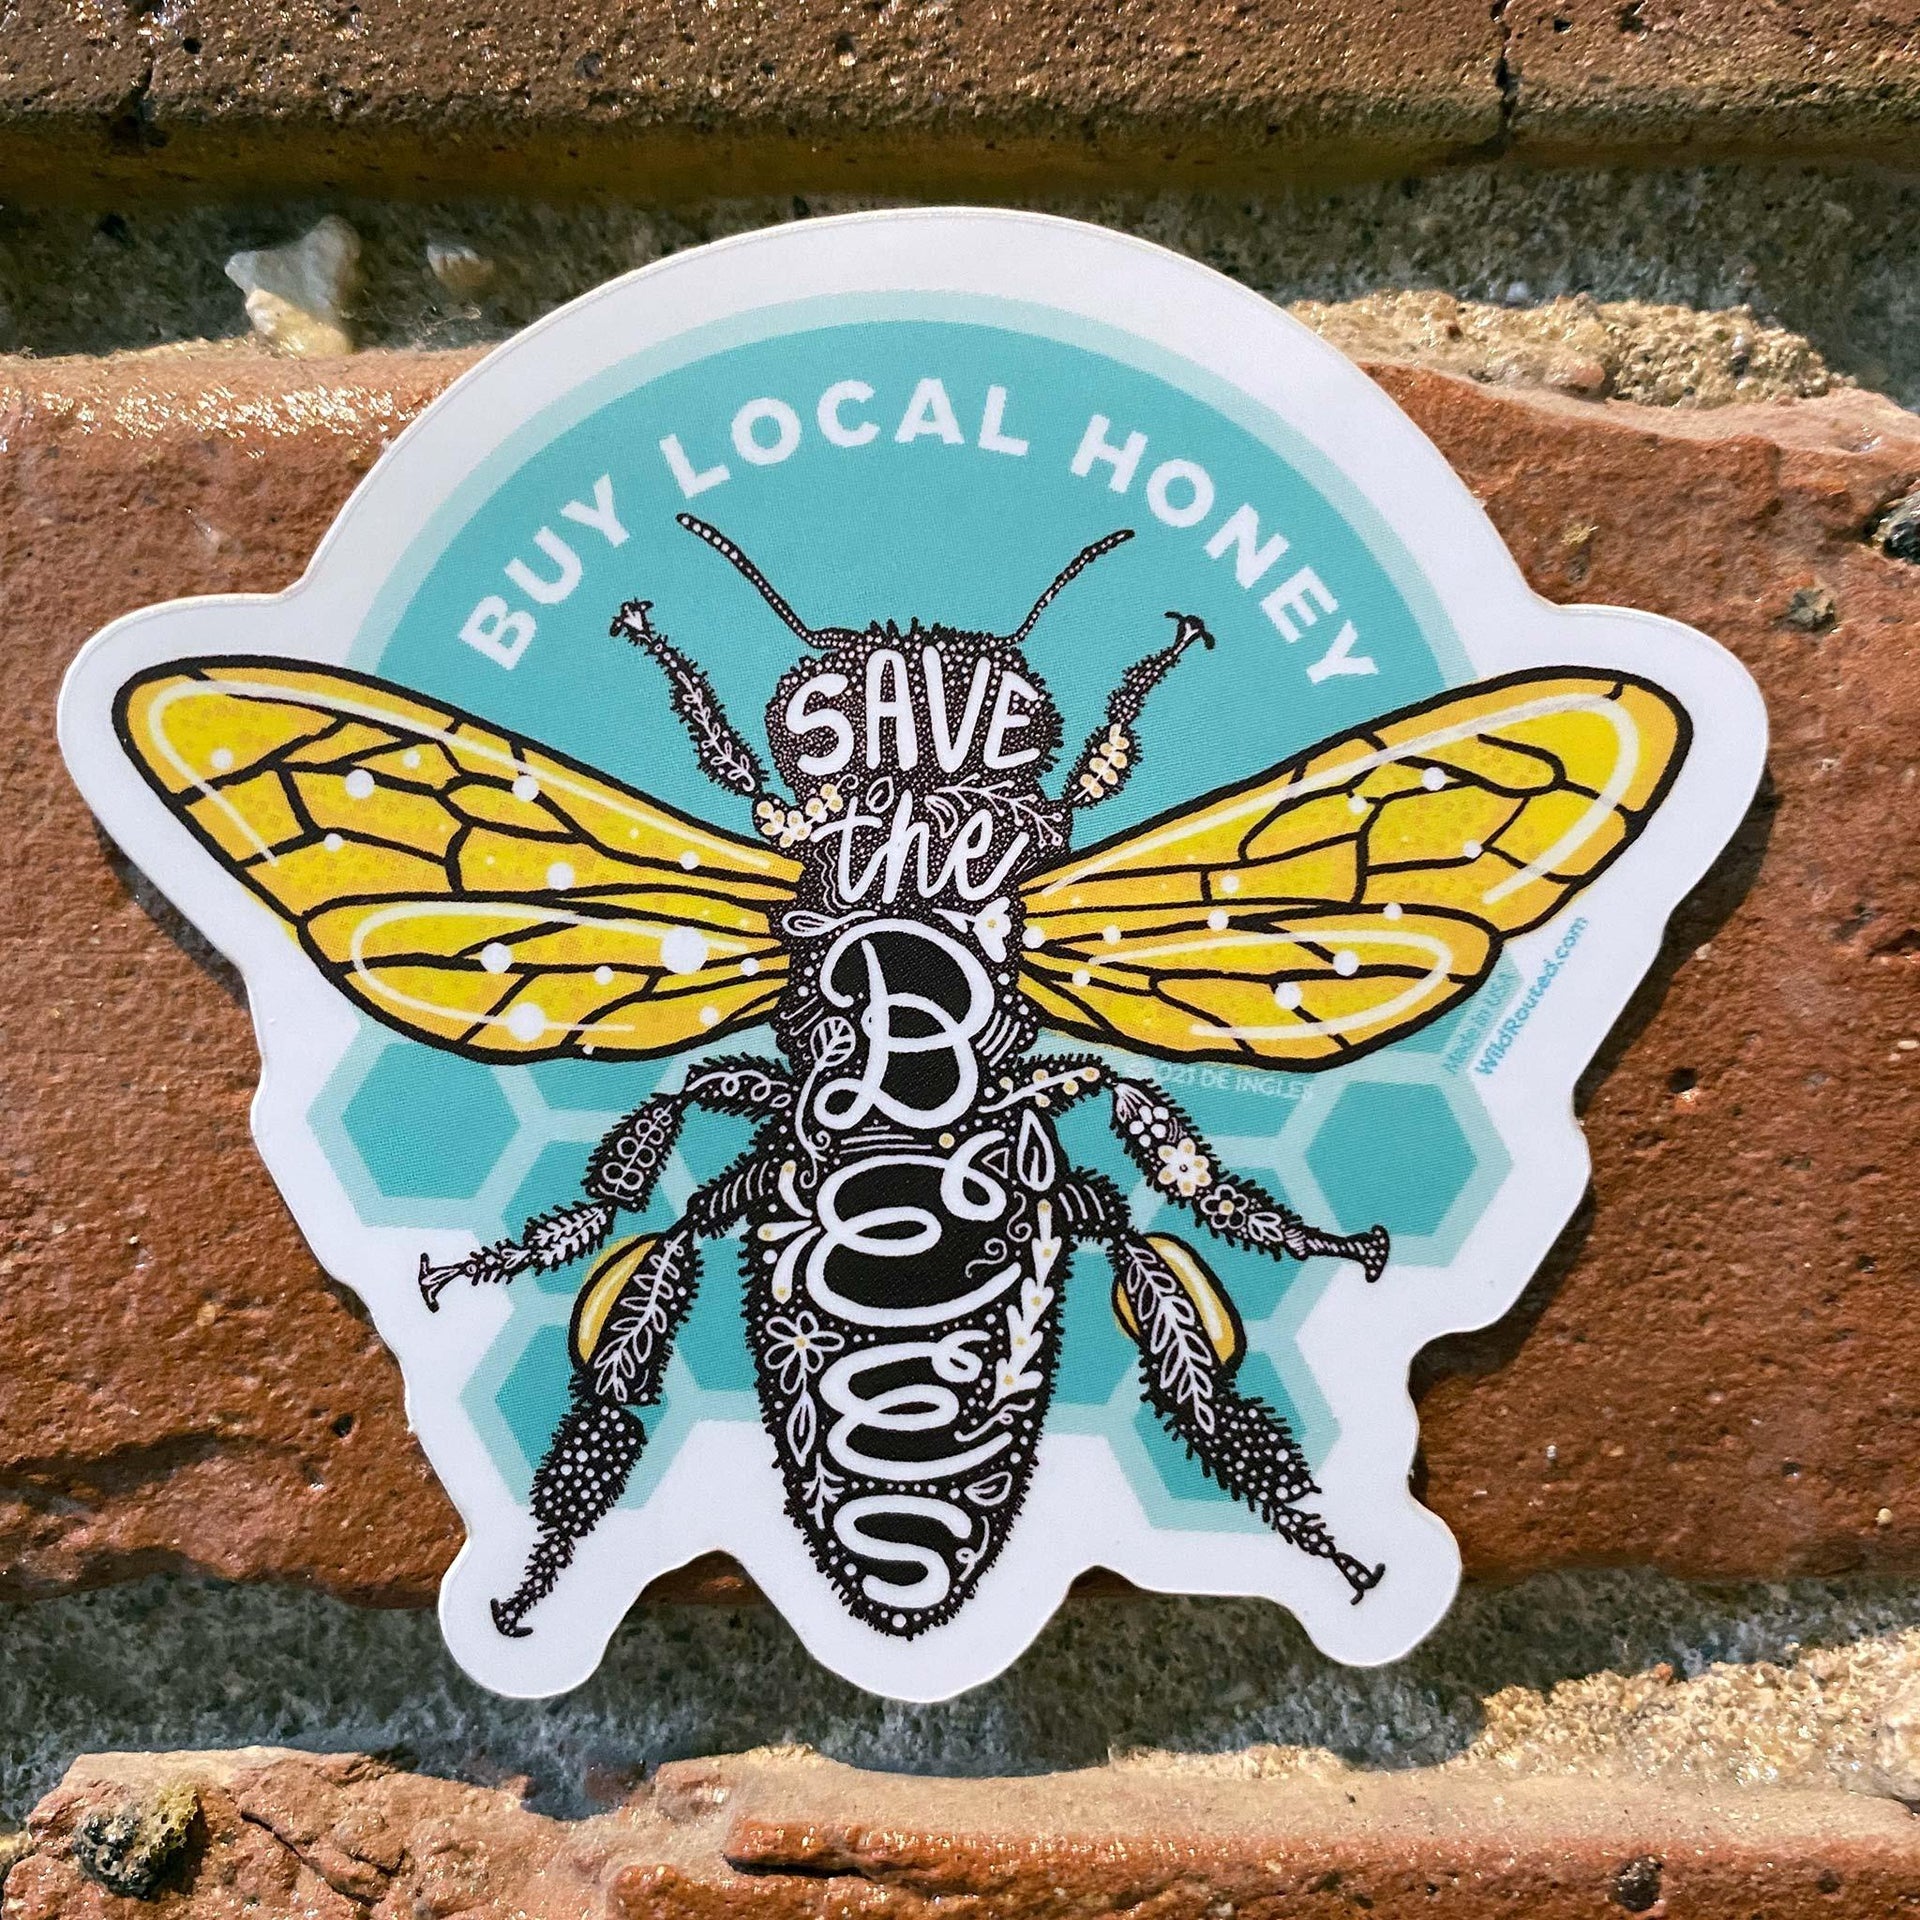 Save the Bees - Buy Local Honey Sticker Decal - Wild Routed